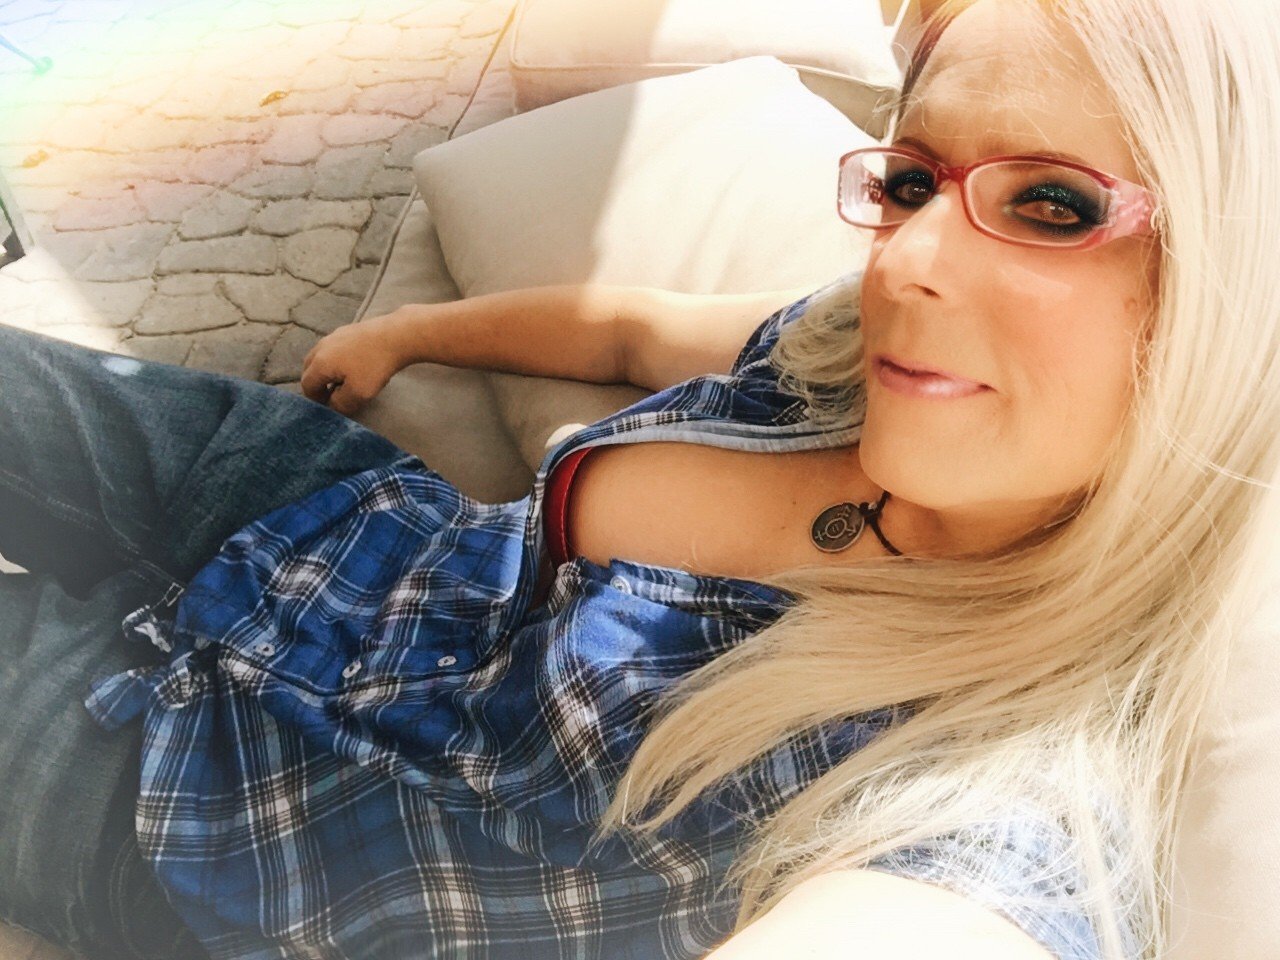 Watch the Photo by TG-Andrea with the username @TG-Andrea, who is a verified user, posted on March 25, 2019. The post is about the topic Trans. and the text says 'Approved!! Yay now I can share my favorite pics with you all!! Please like share and comment to help me grow! So excited to share me with all of you!! Kisses 😘

#transgender #tranny'